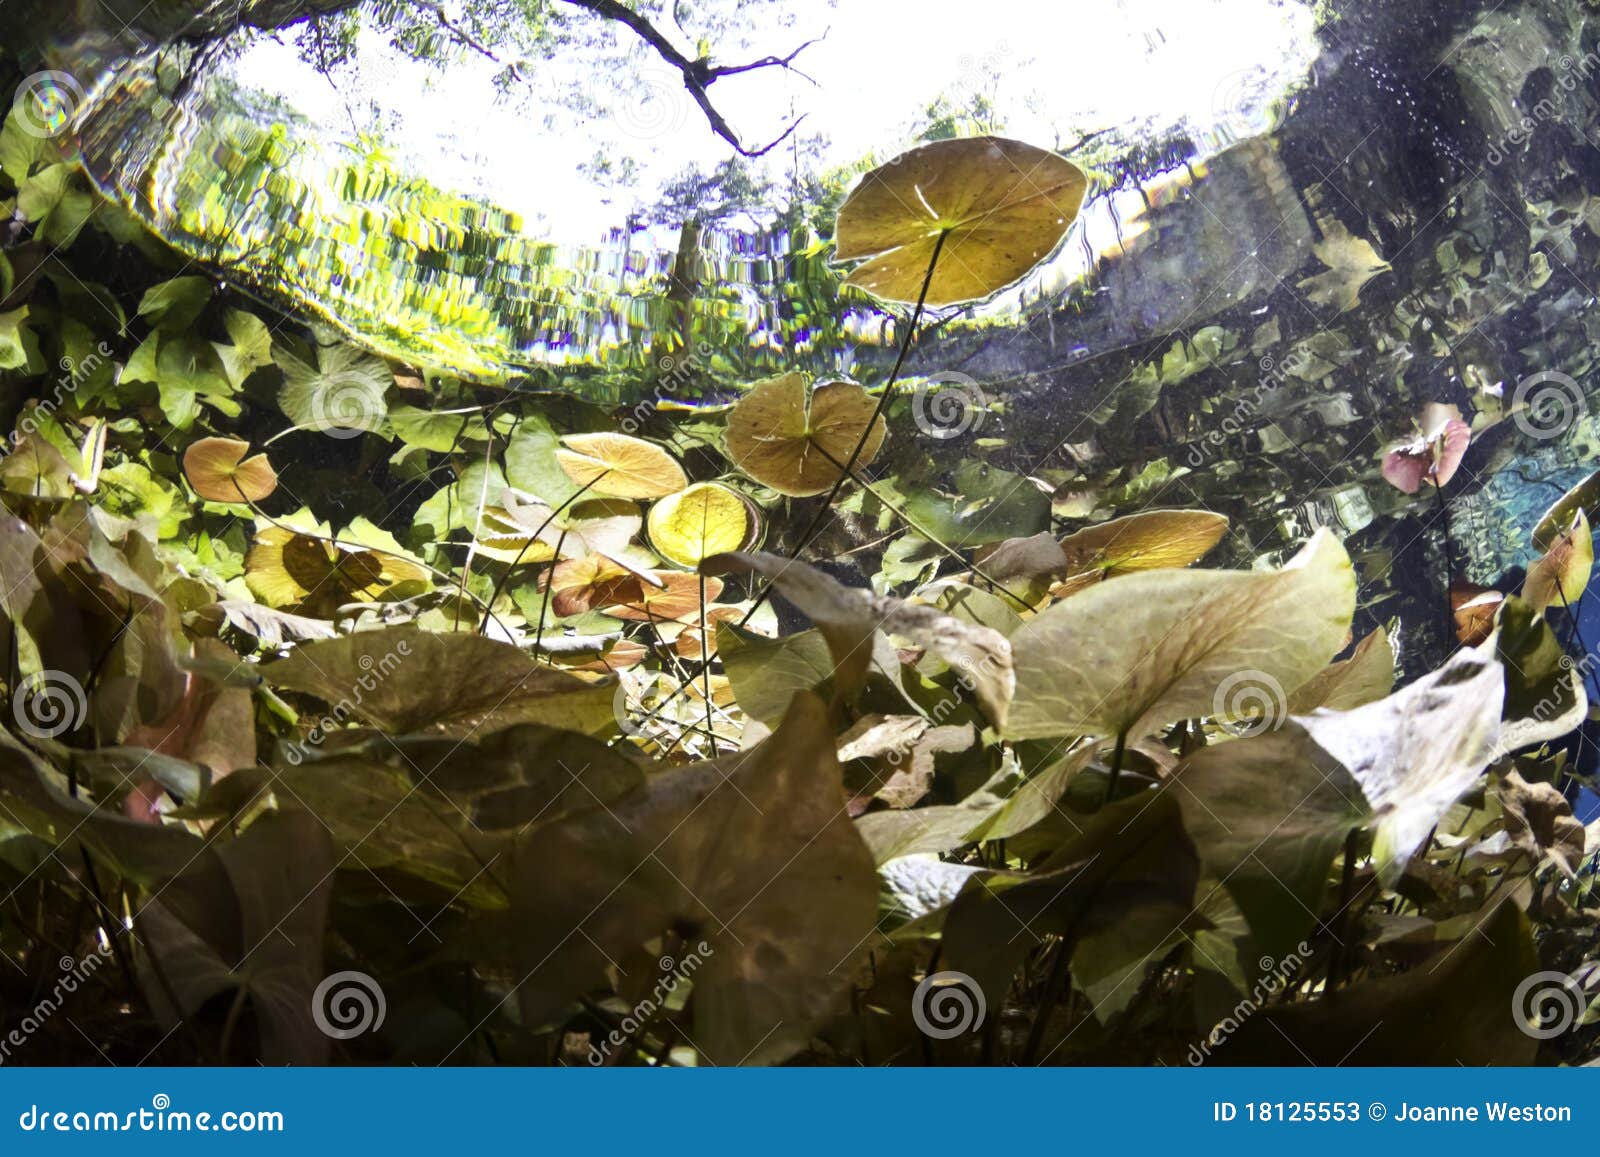 Lilly pads from underwater stock image. Image of pond - 18125553